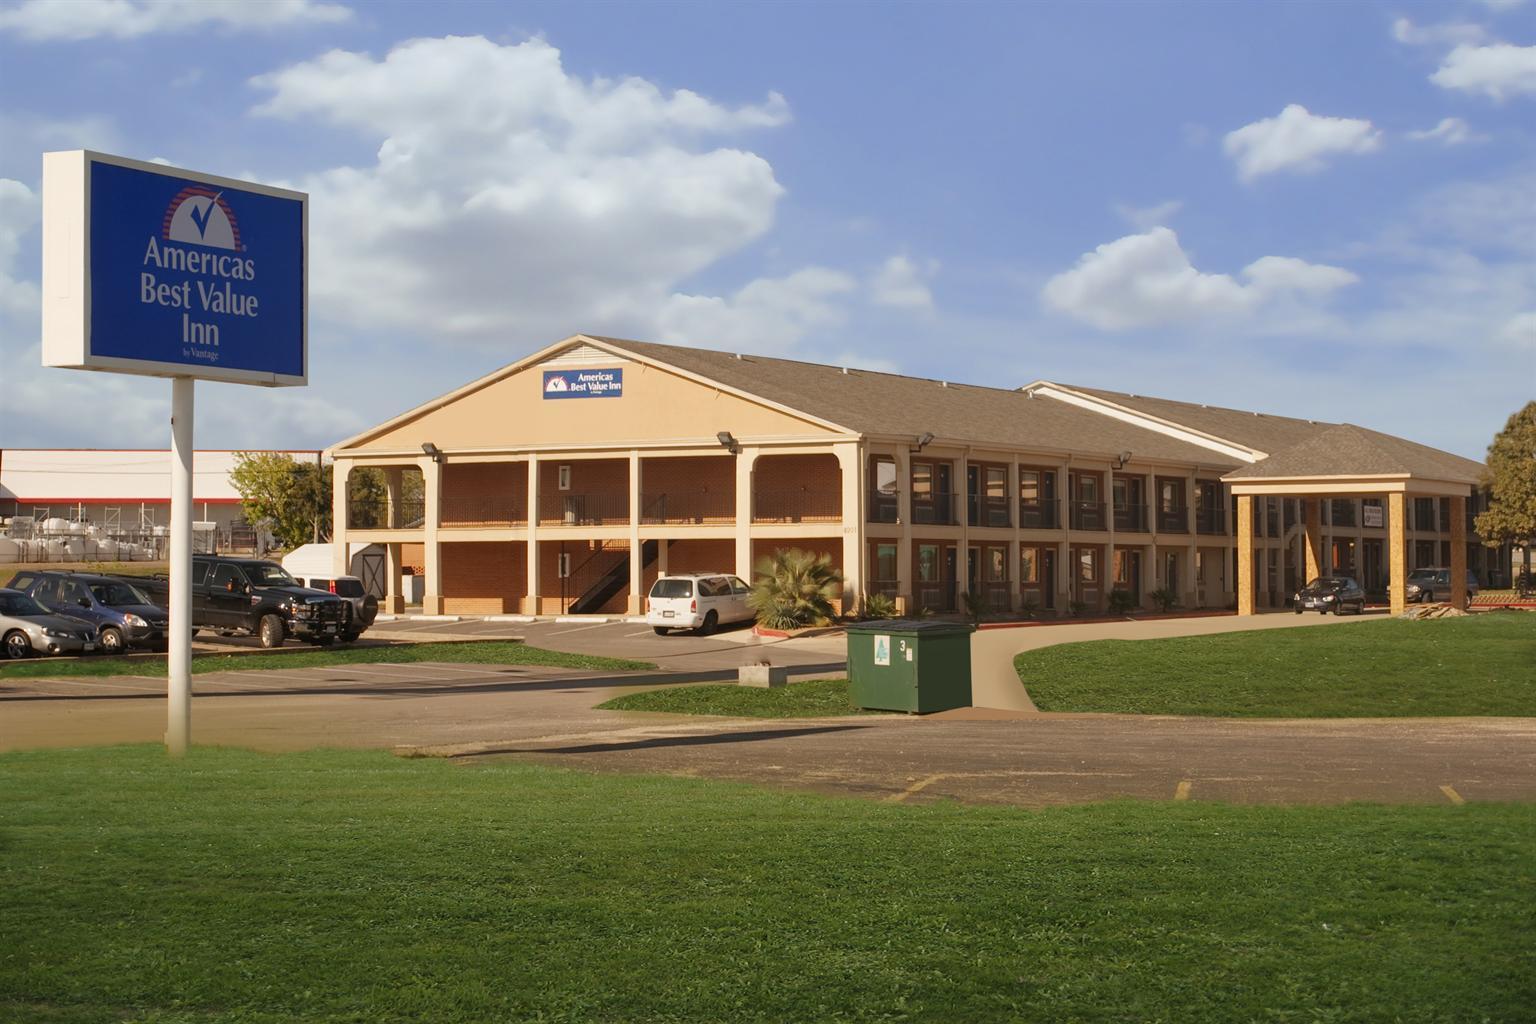 Street view of hotel exterior with parking, lawn, and sign